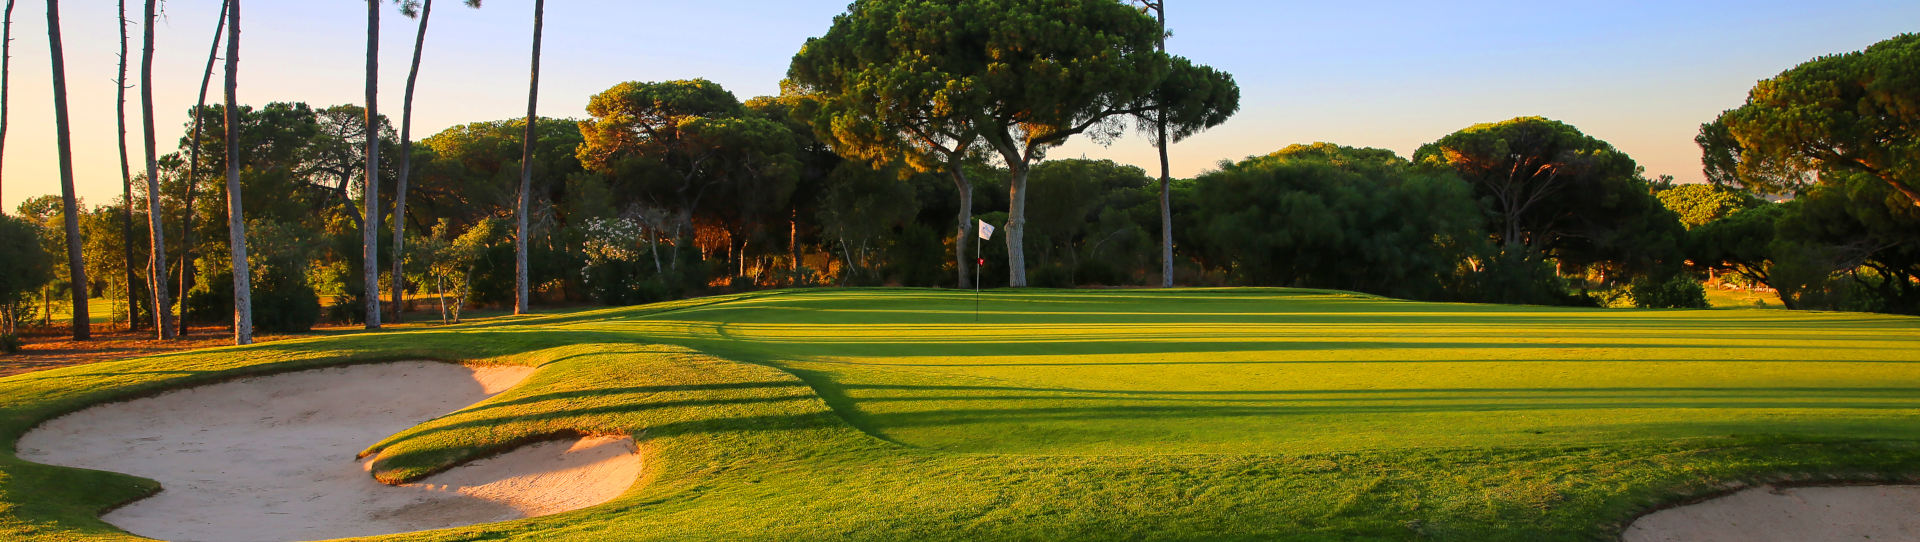 Portugal golf courses - Vilamoura Old Course - Photo 1